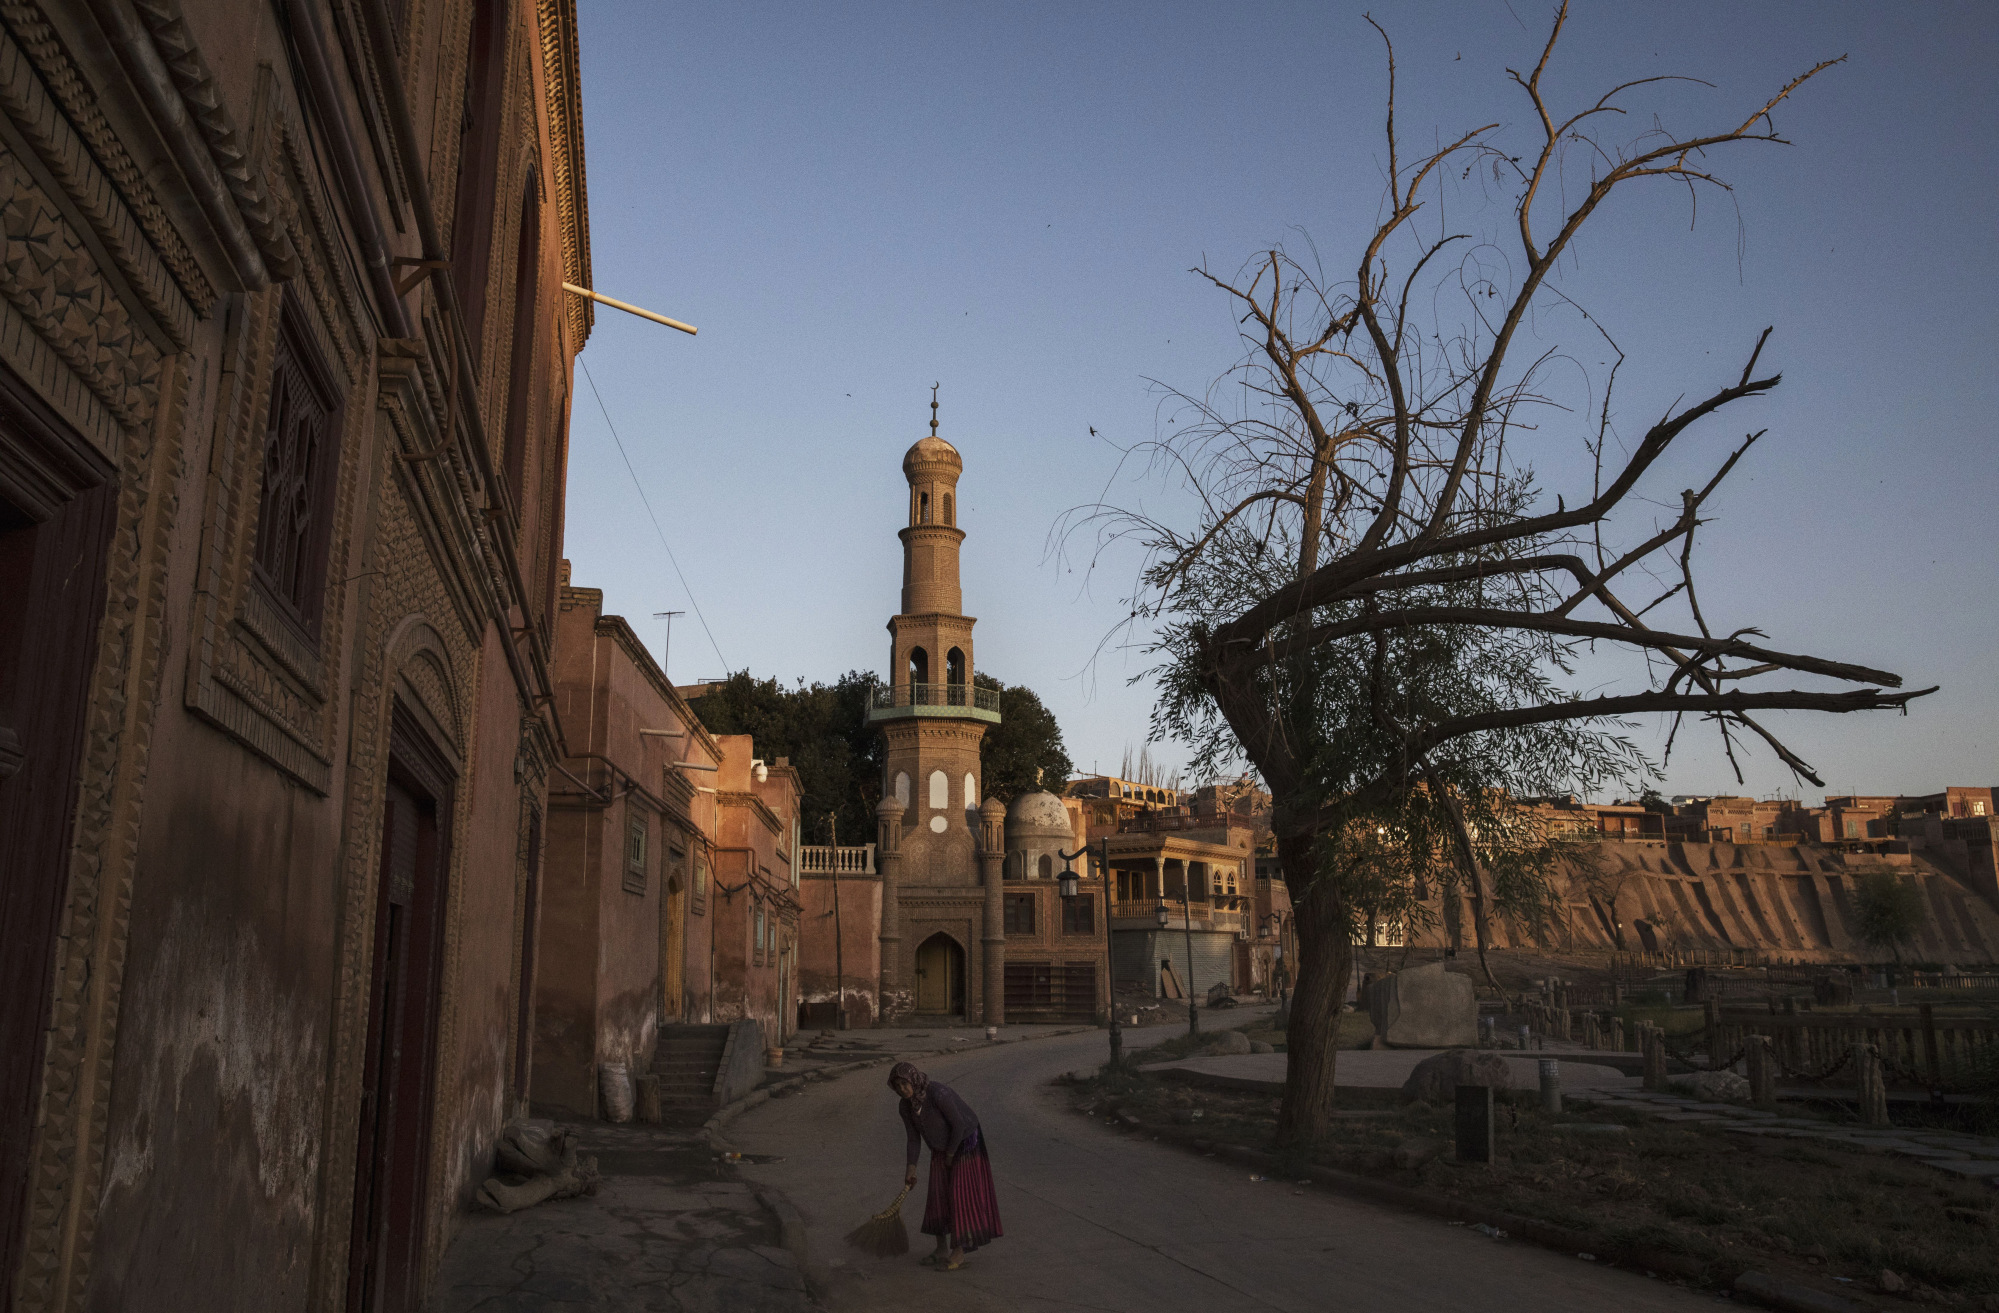 Old town of Kashgar&nbsp;in the far western Xinjiang province, China.